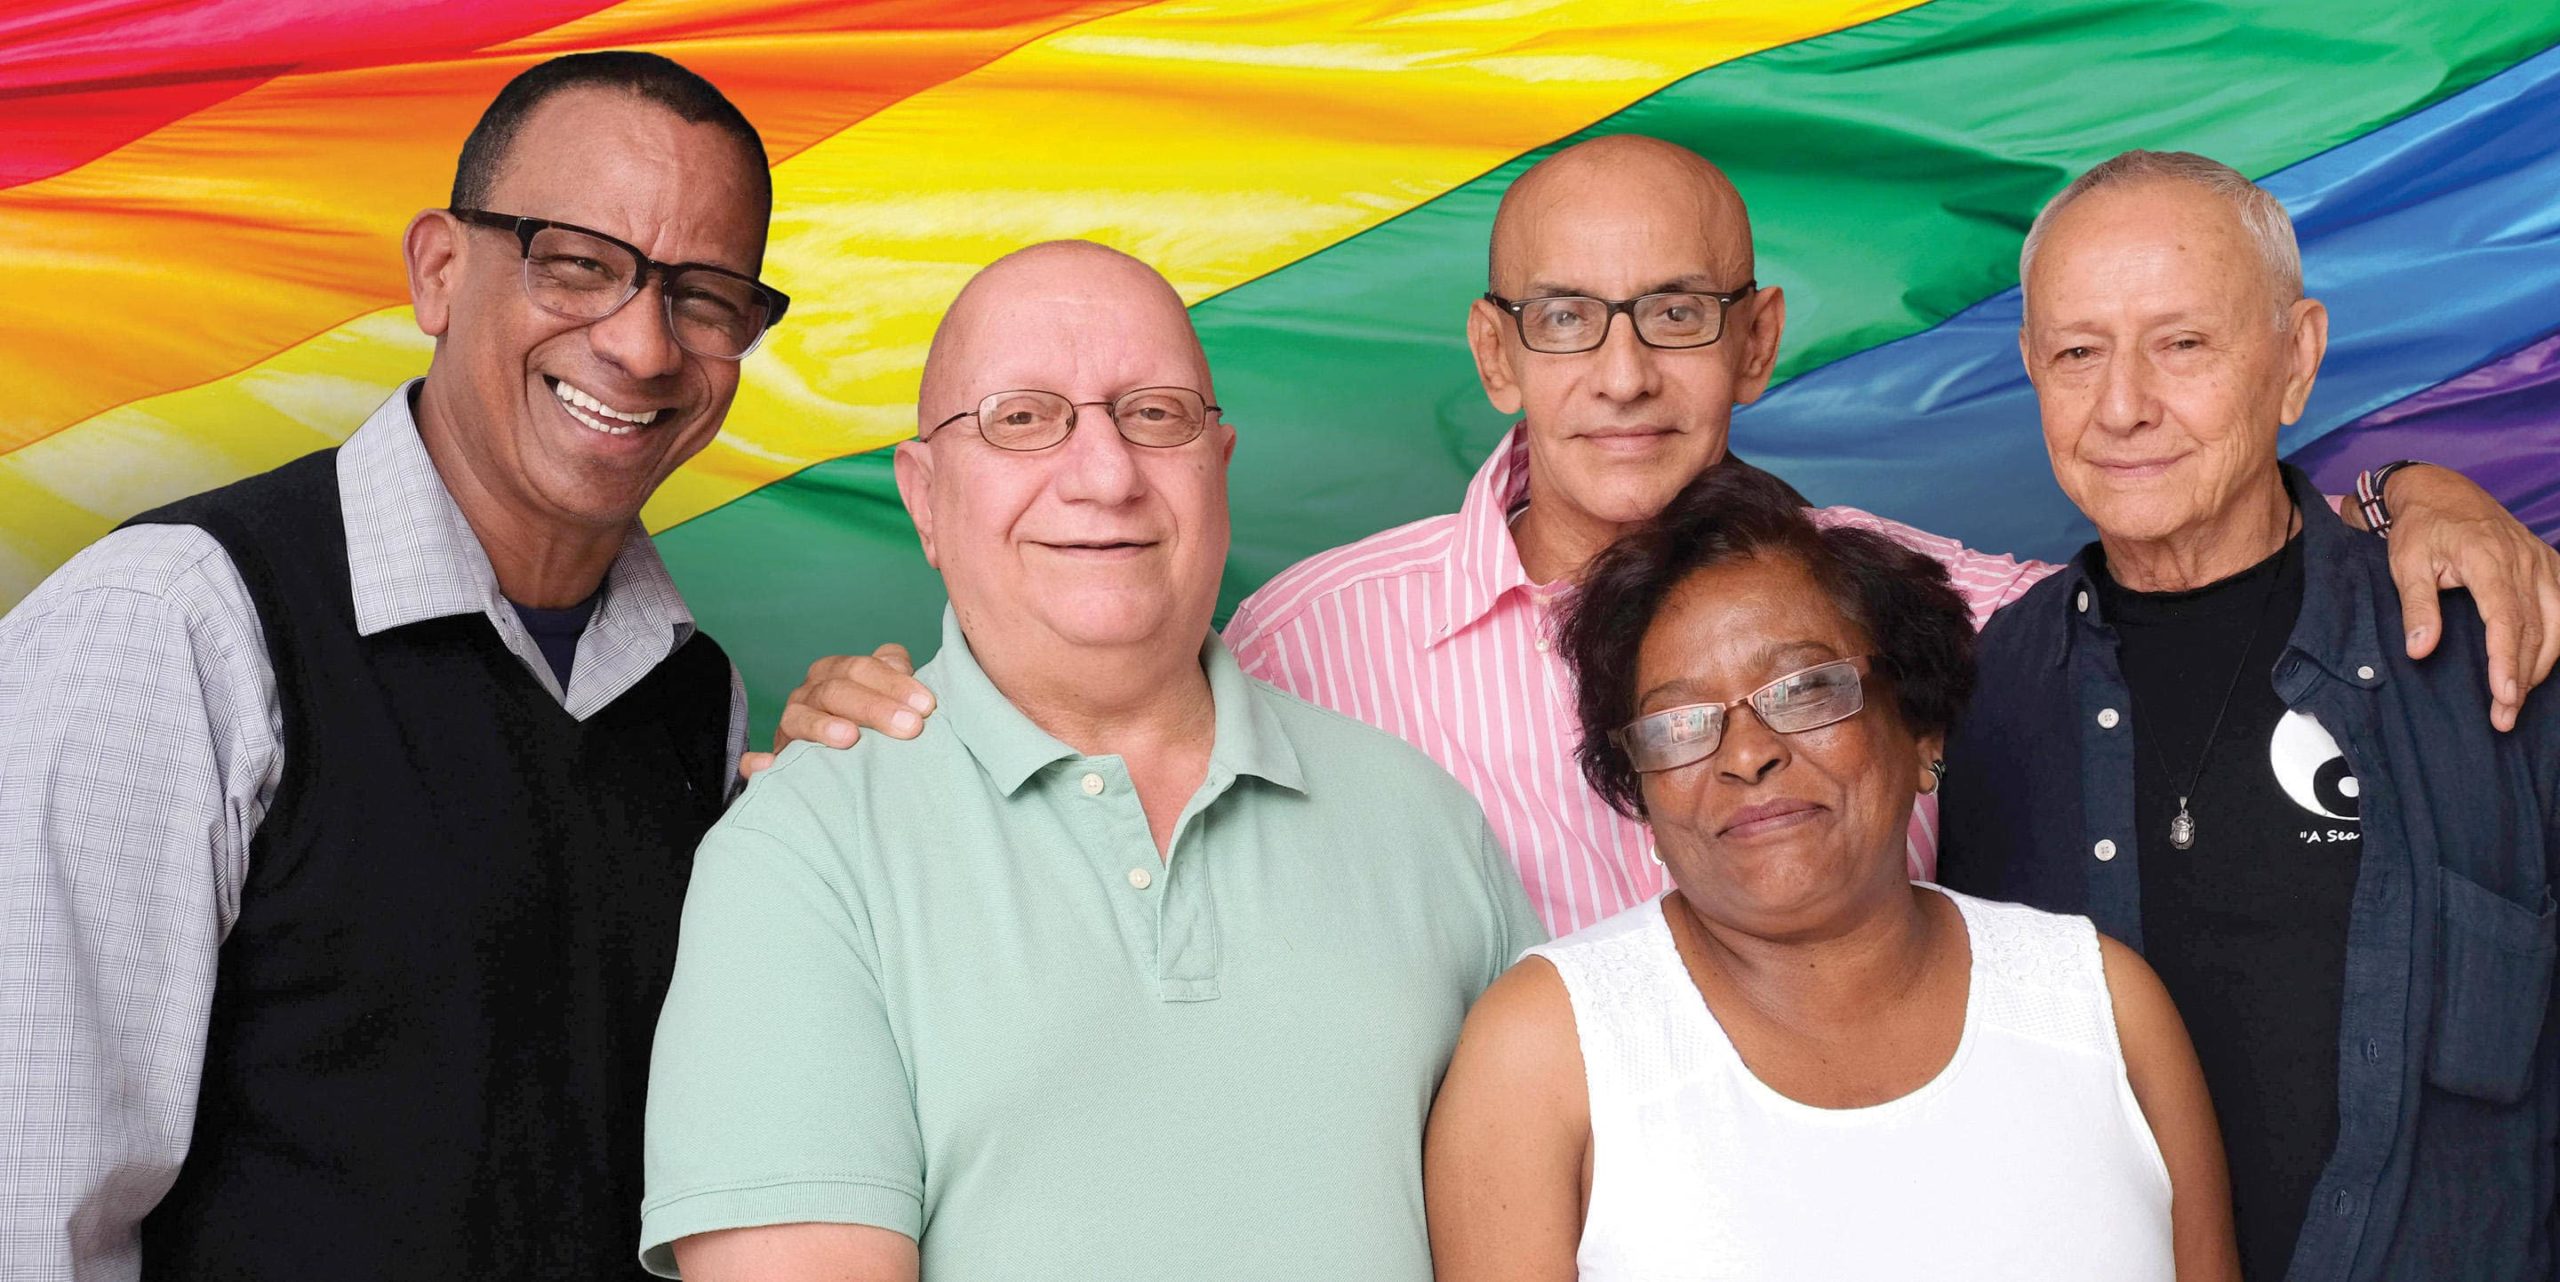 Meet the faces behind SAGE’s HIV & Aging Policy Action Coalition